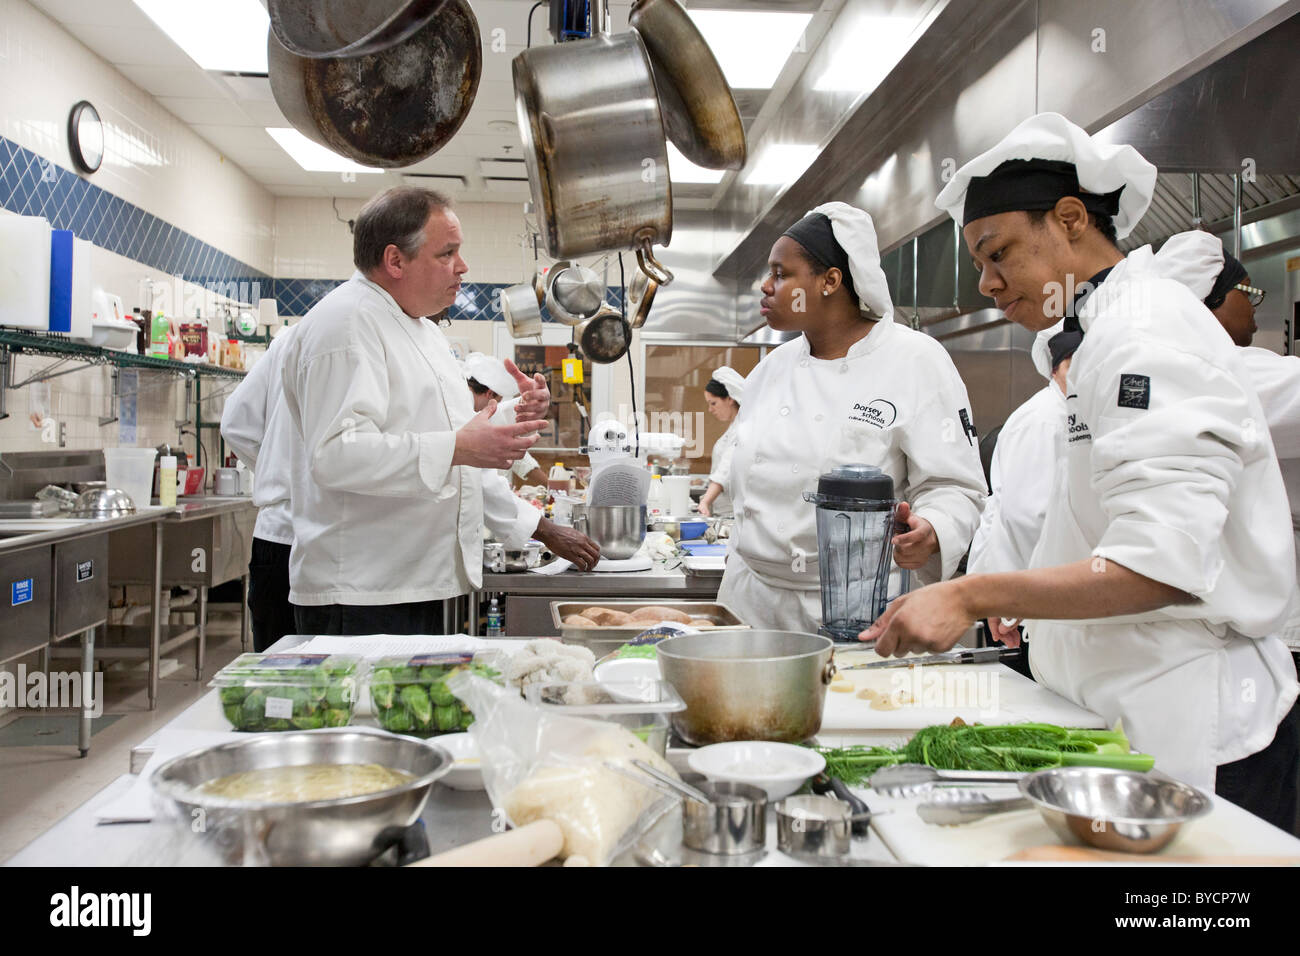 Instructor John Adamski works with students preparing food at the Dorsey Culinary Academy, a private career training school. Stock Photo